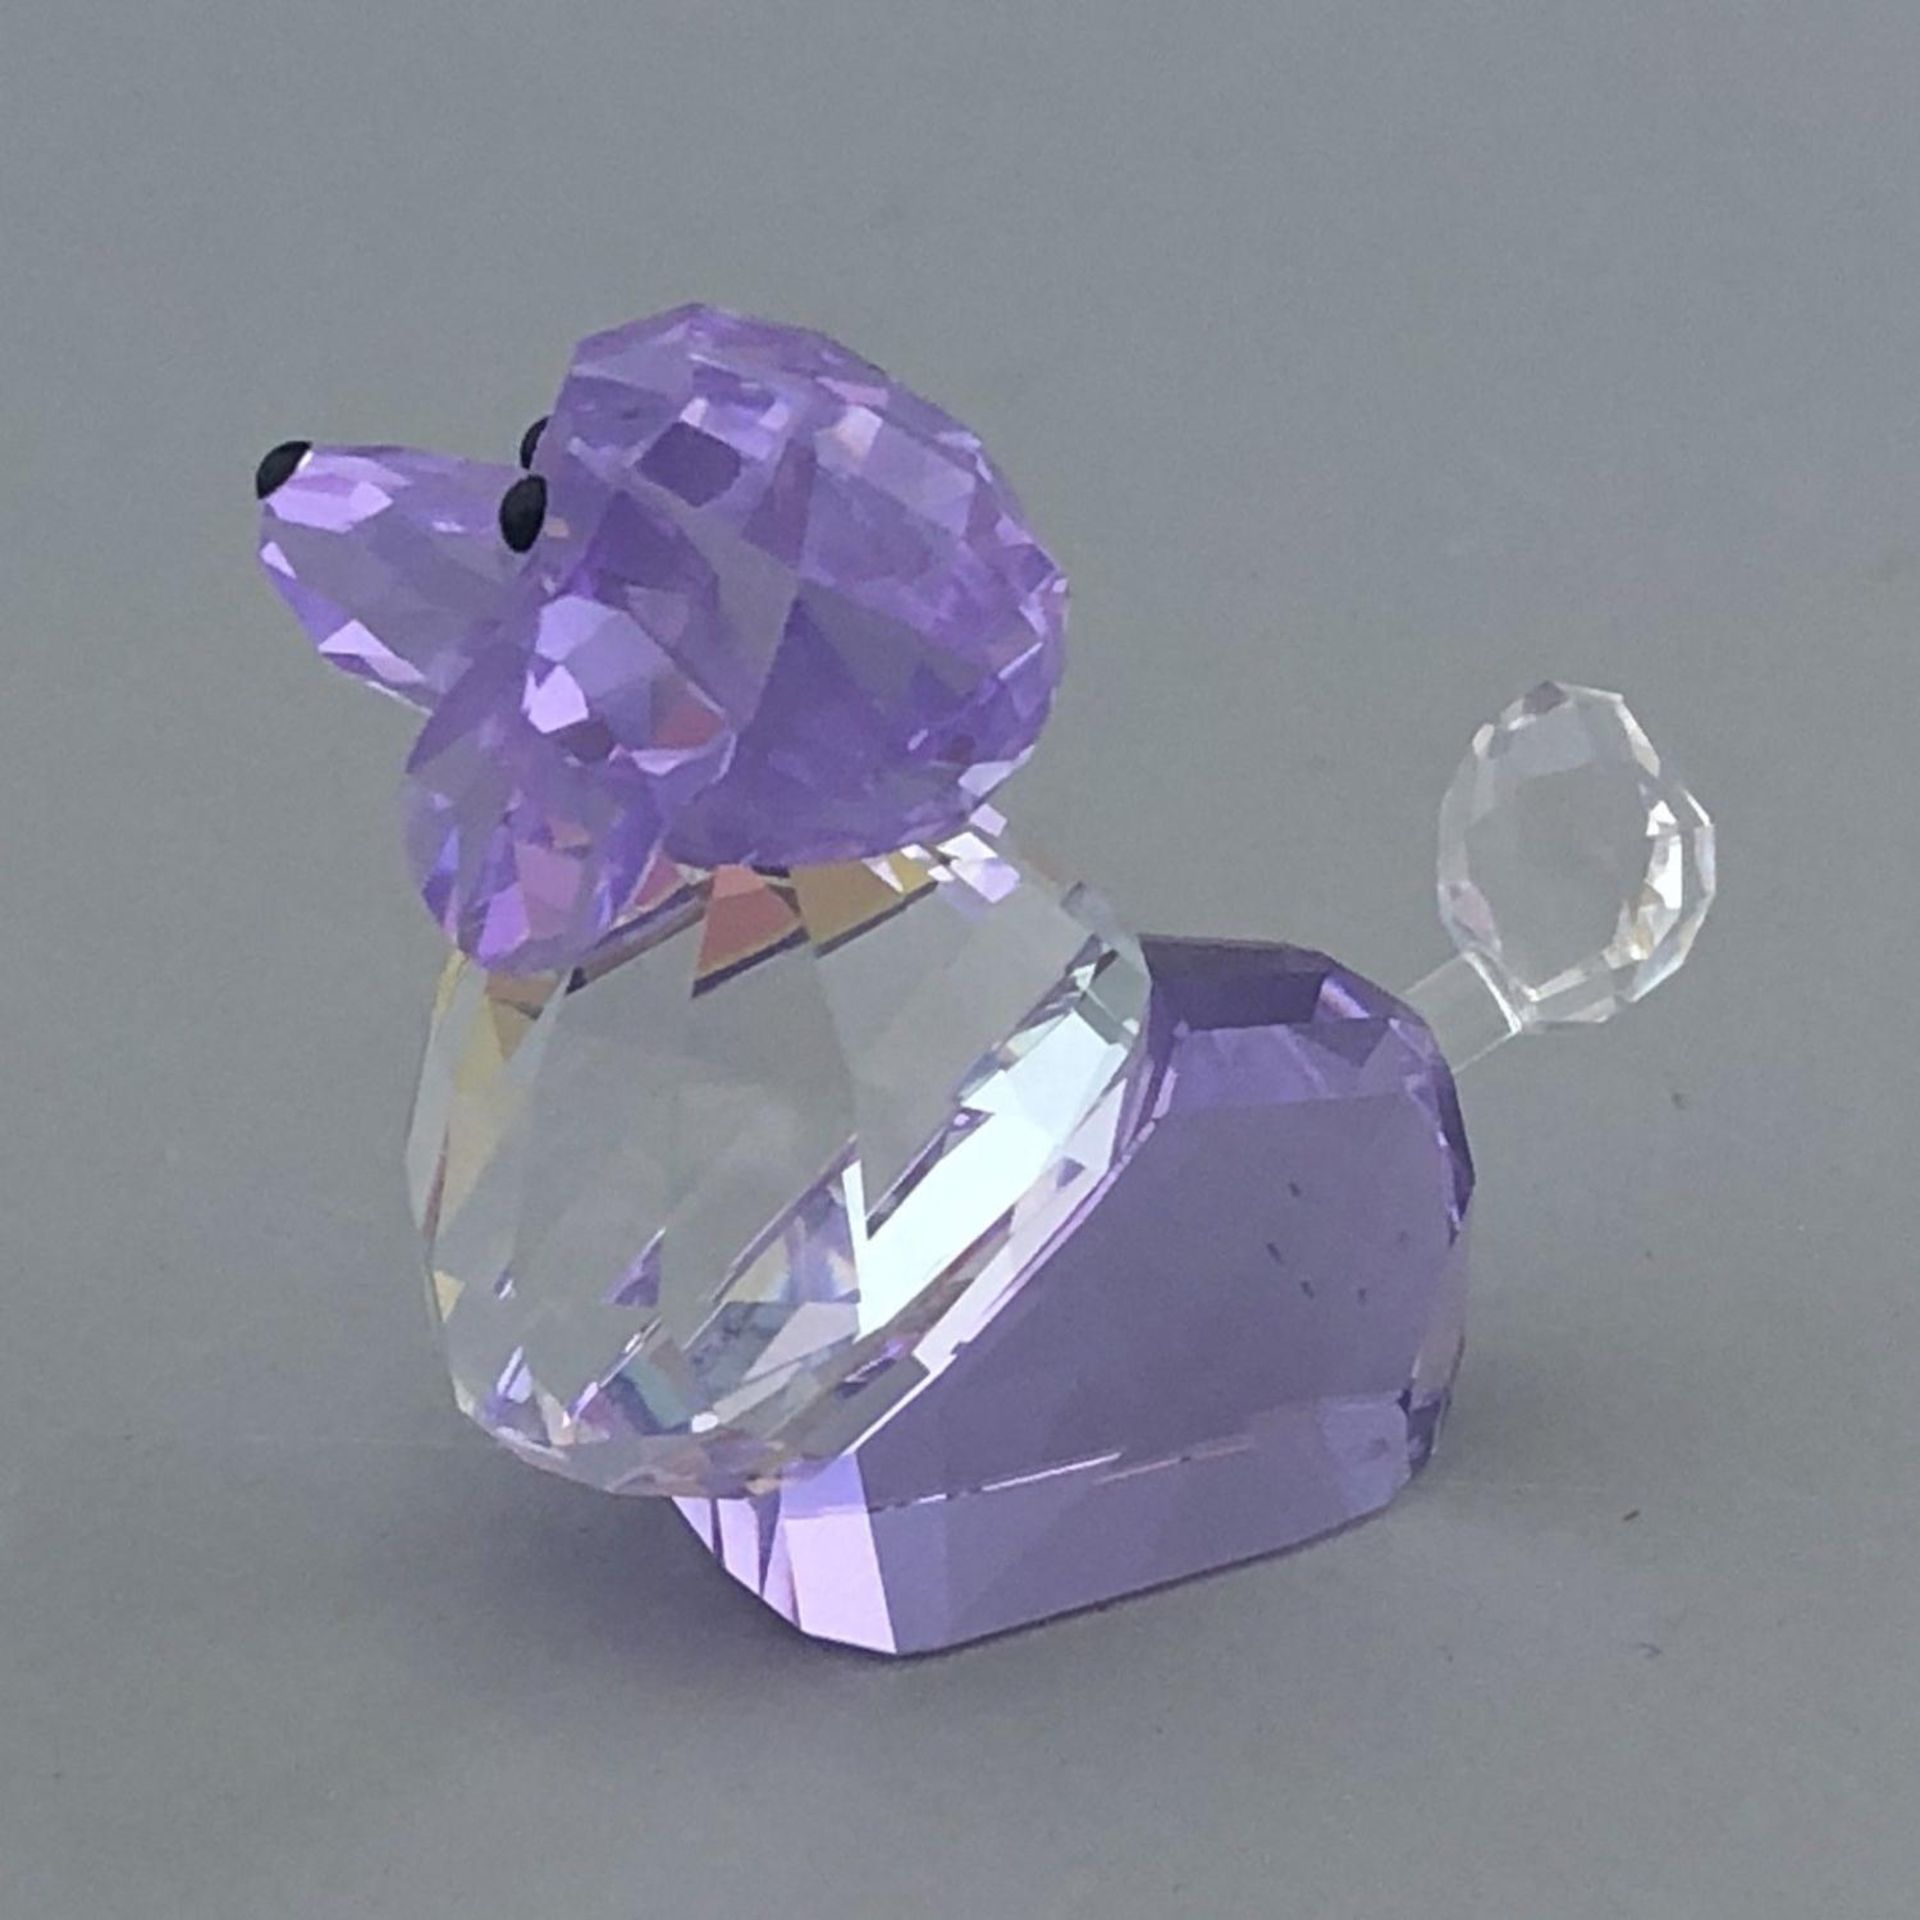 Small Poodle Puppy Crystal Figurine by Swarovski Lovlots Gang of Dogs Violetta - Image 3 of 5